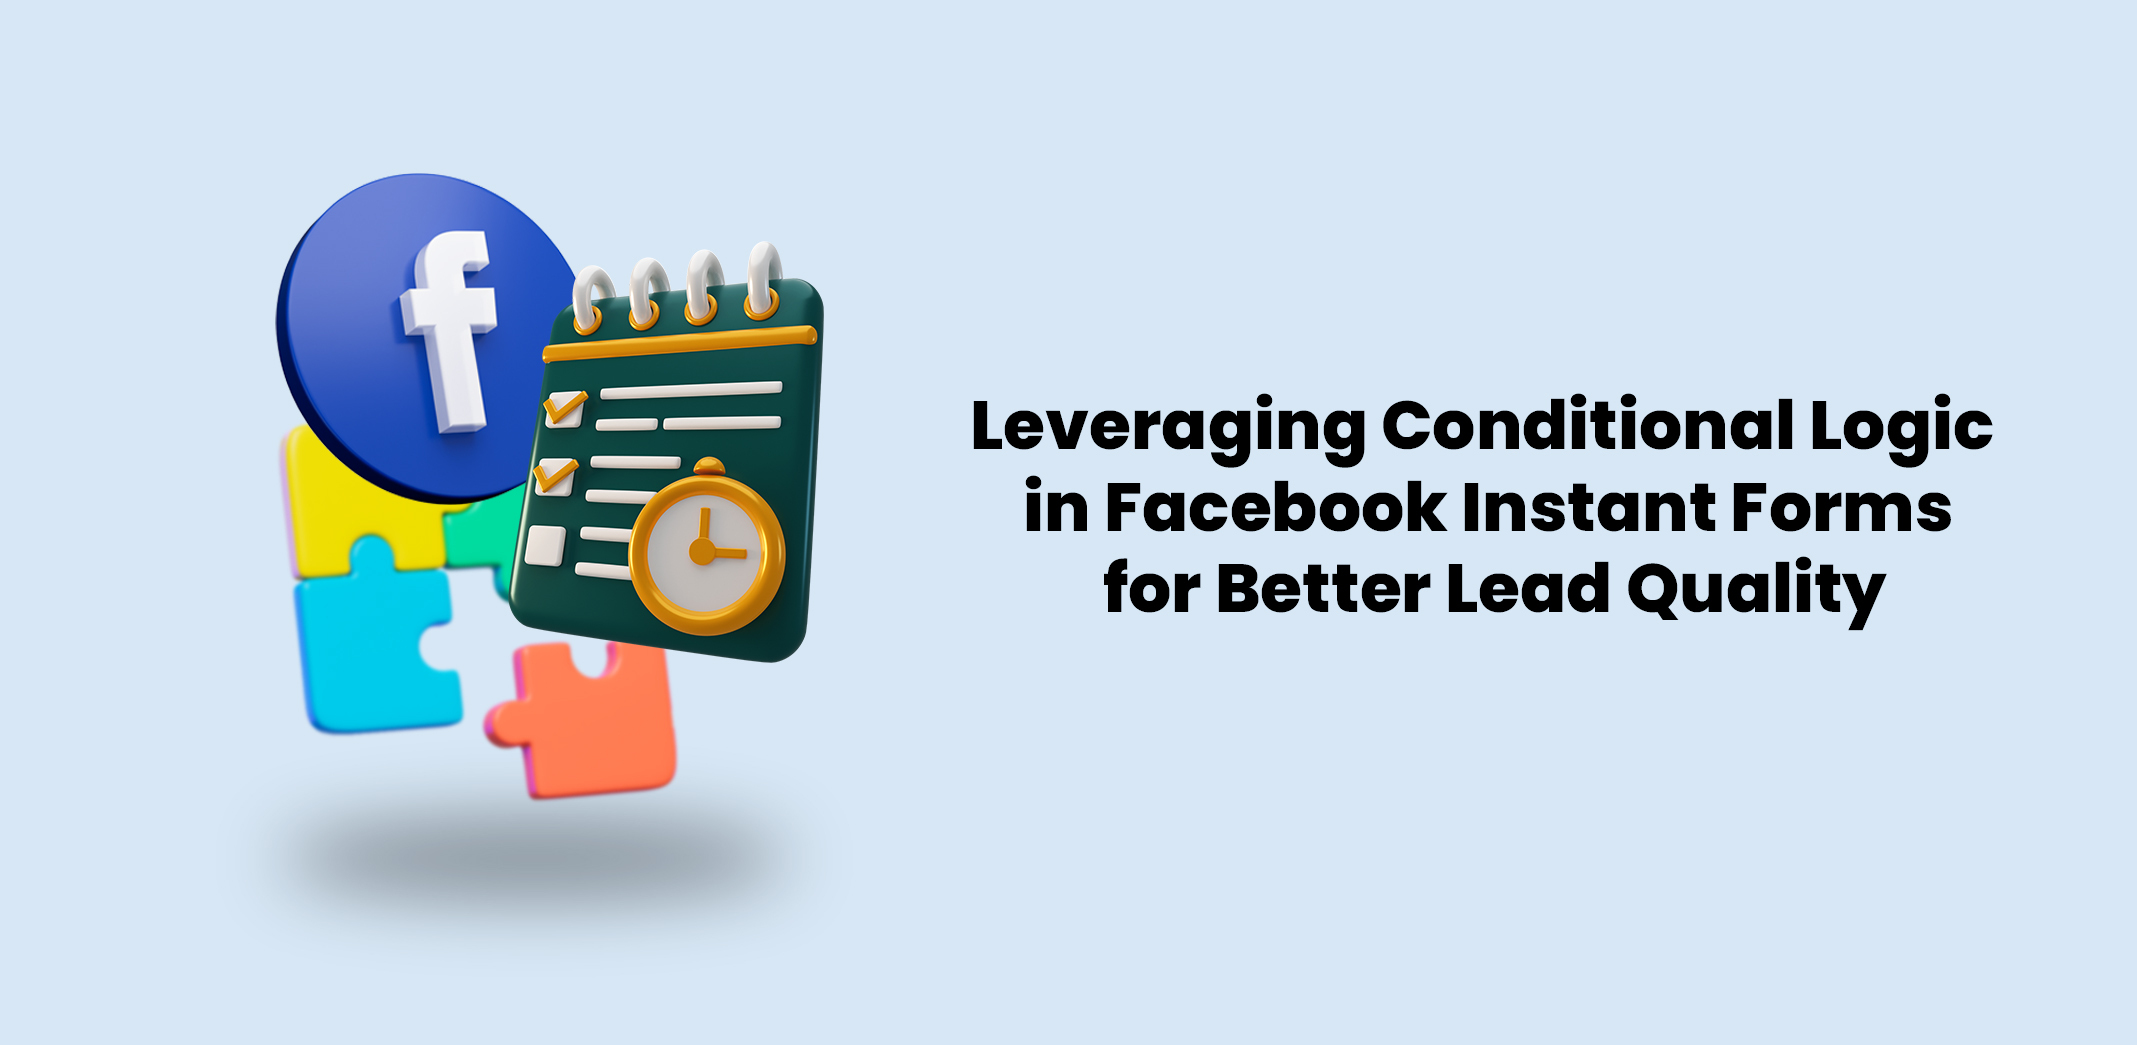 Leveraging Conditional Logic in Facebook Instant Forms for Better Lead Quality